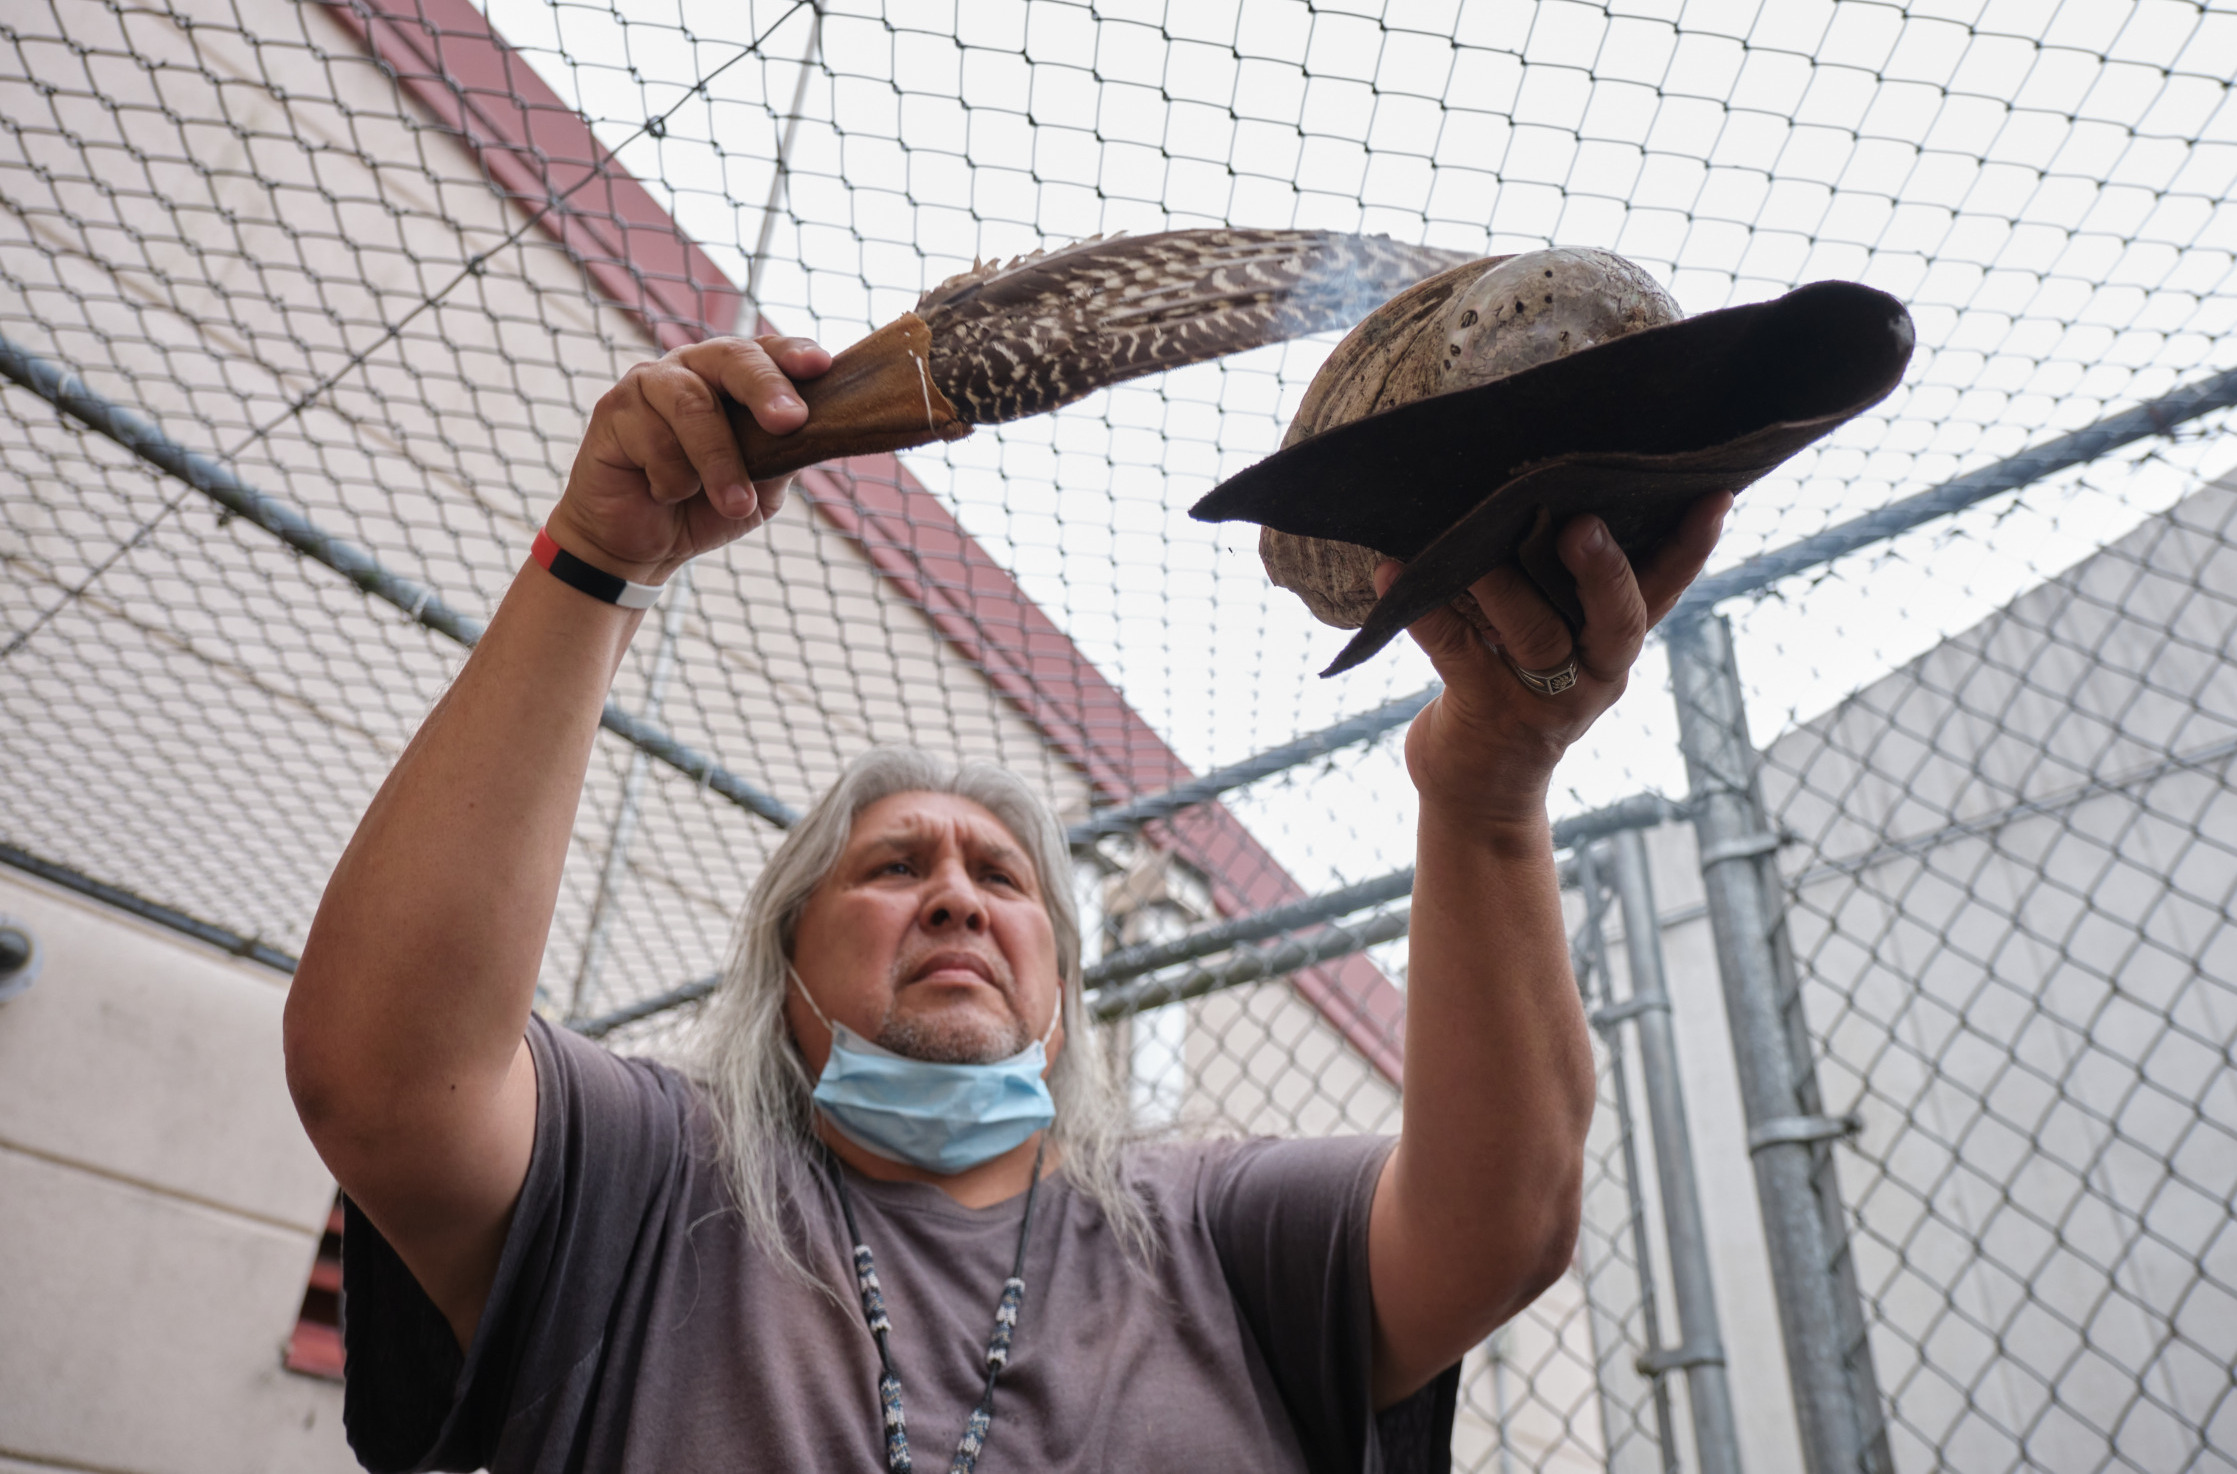 Native American rituals: Native American relder man with long gray hair ho,ding plate of smoking dage and using eagle feather to disperse the smoke